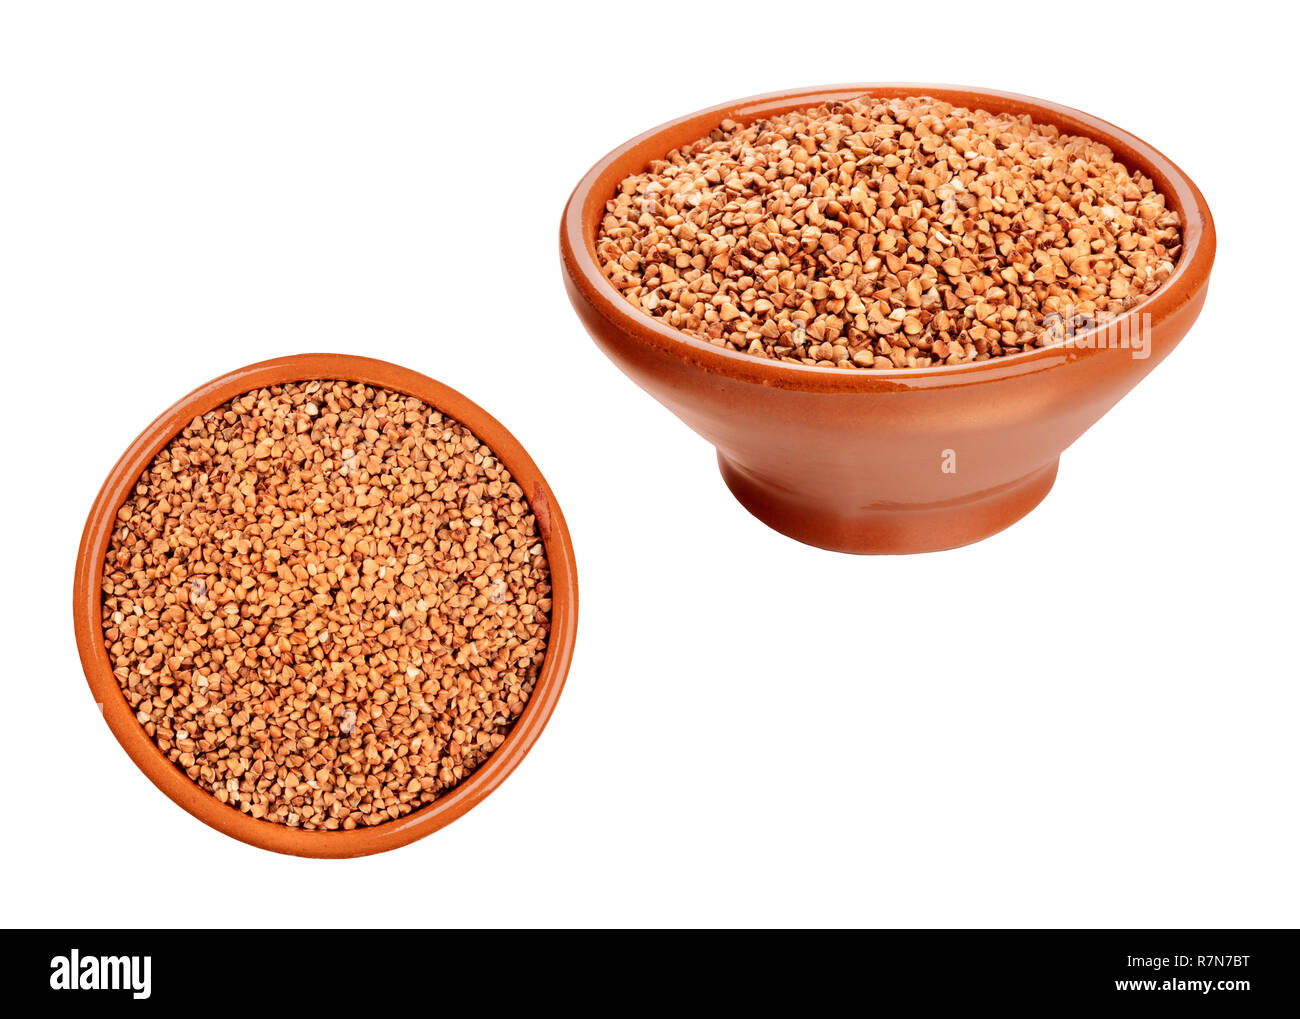 Photos of dry buckwheat in earthenware bowls, angle and overhead views, isolated on a white background Stock Photo